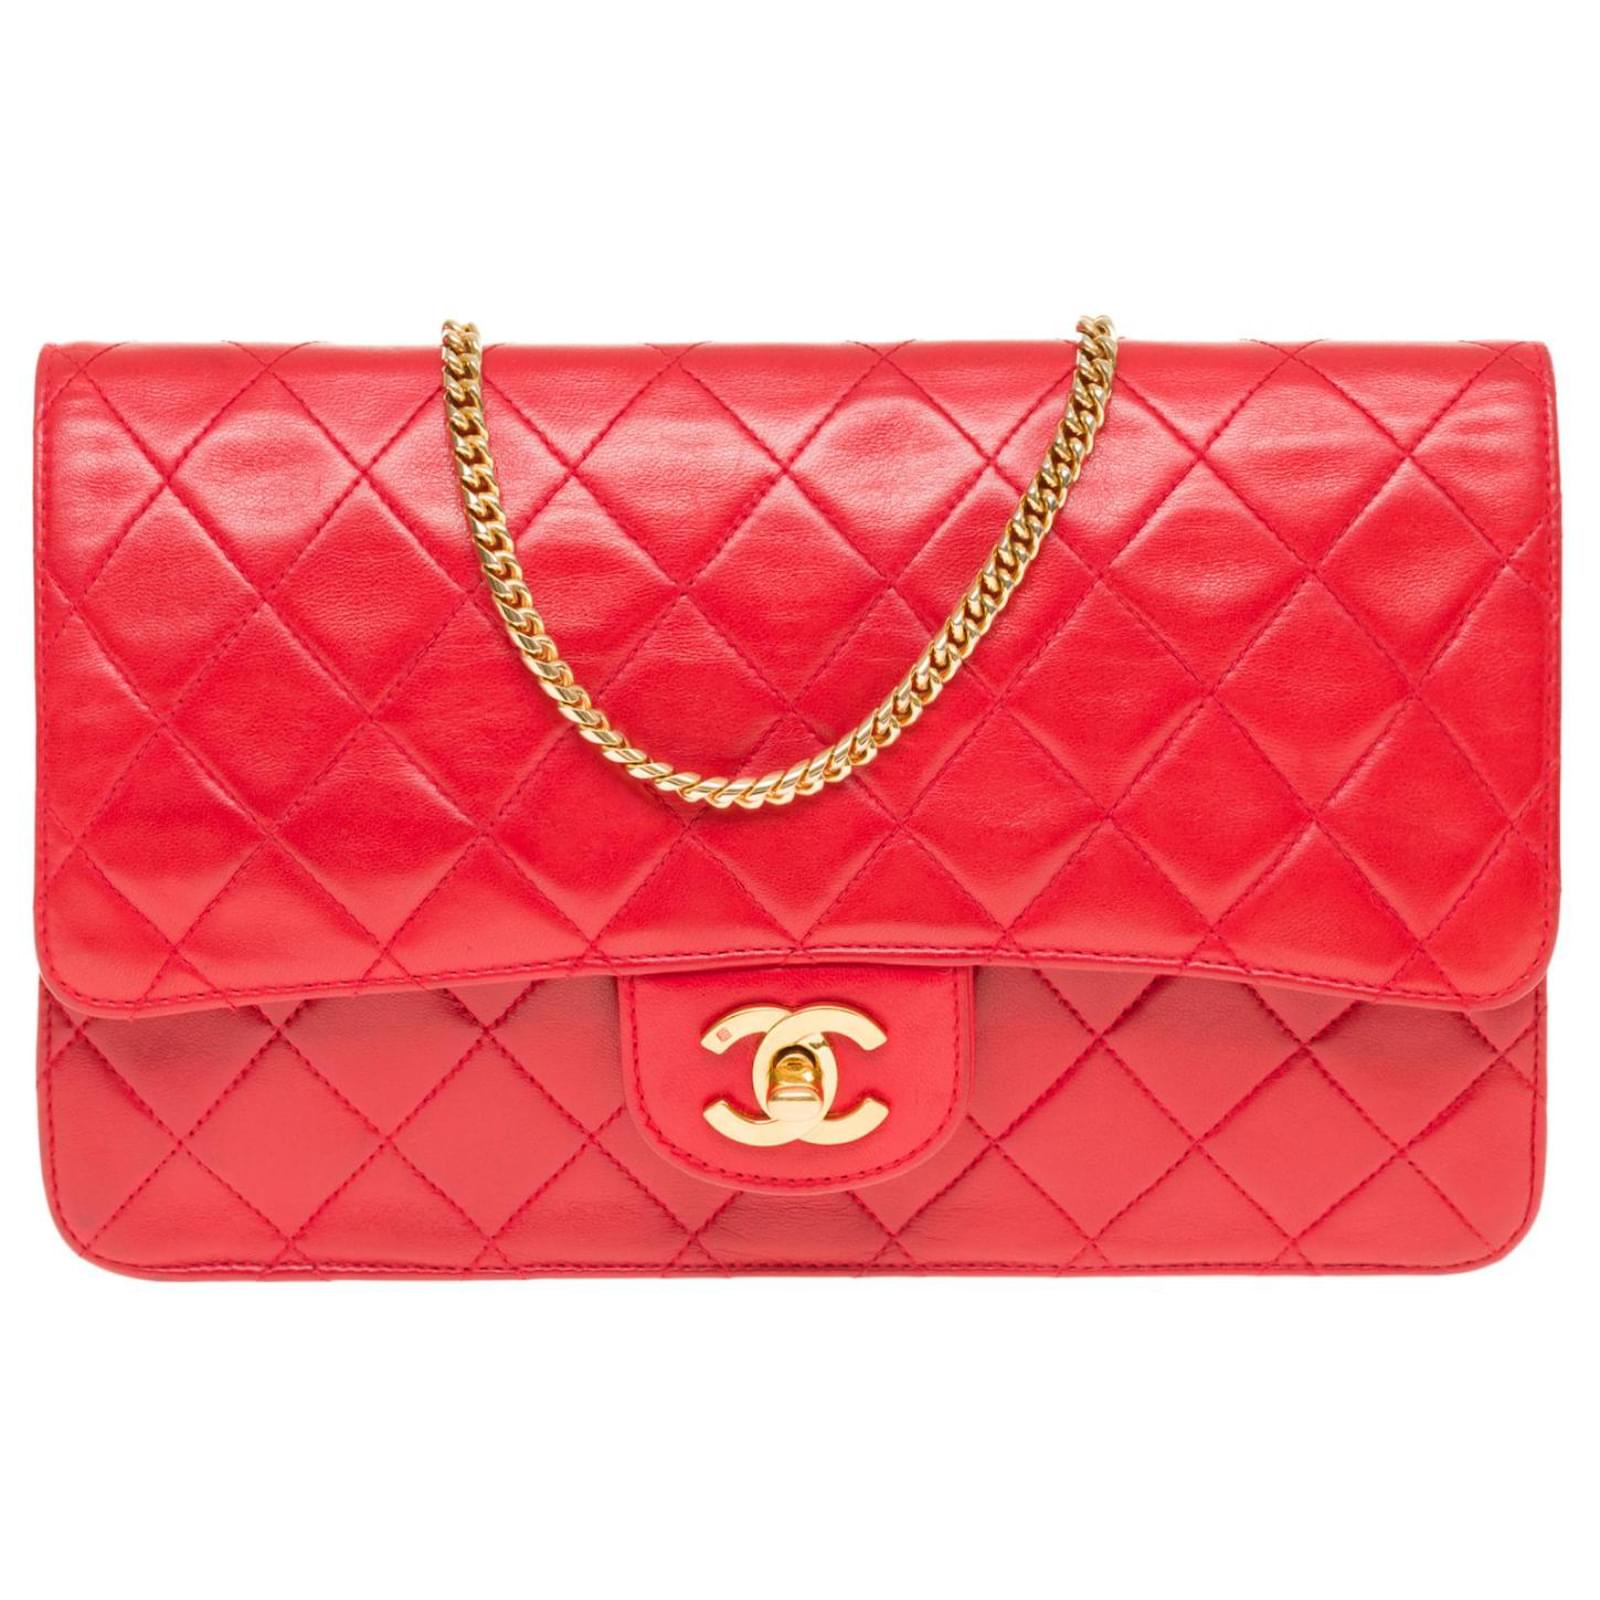 chanel classic red white